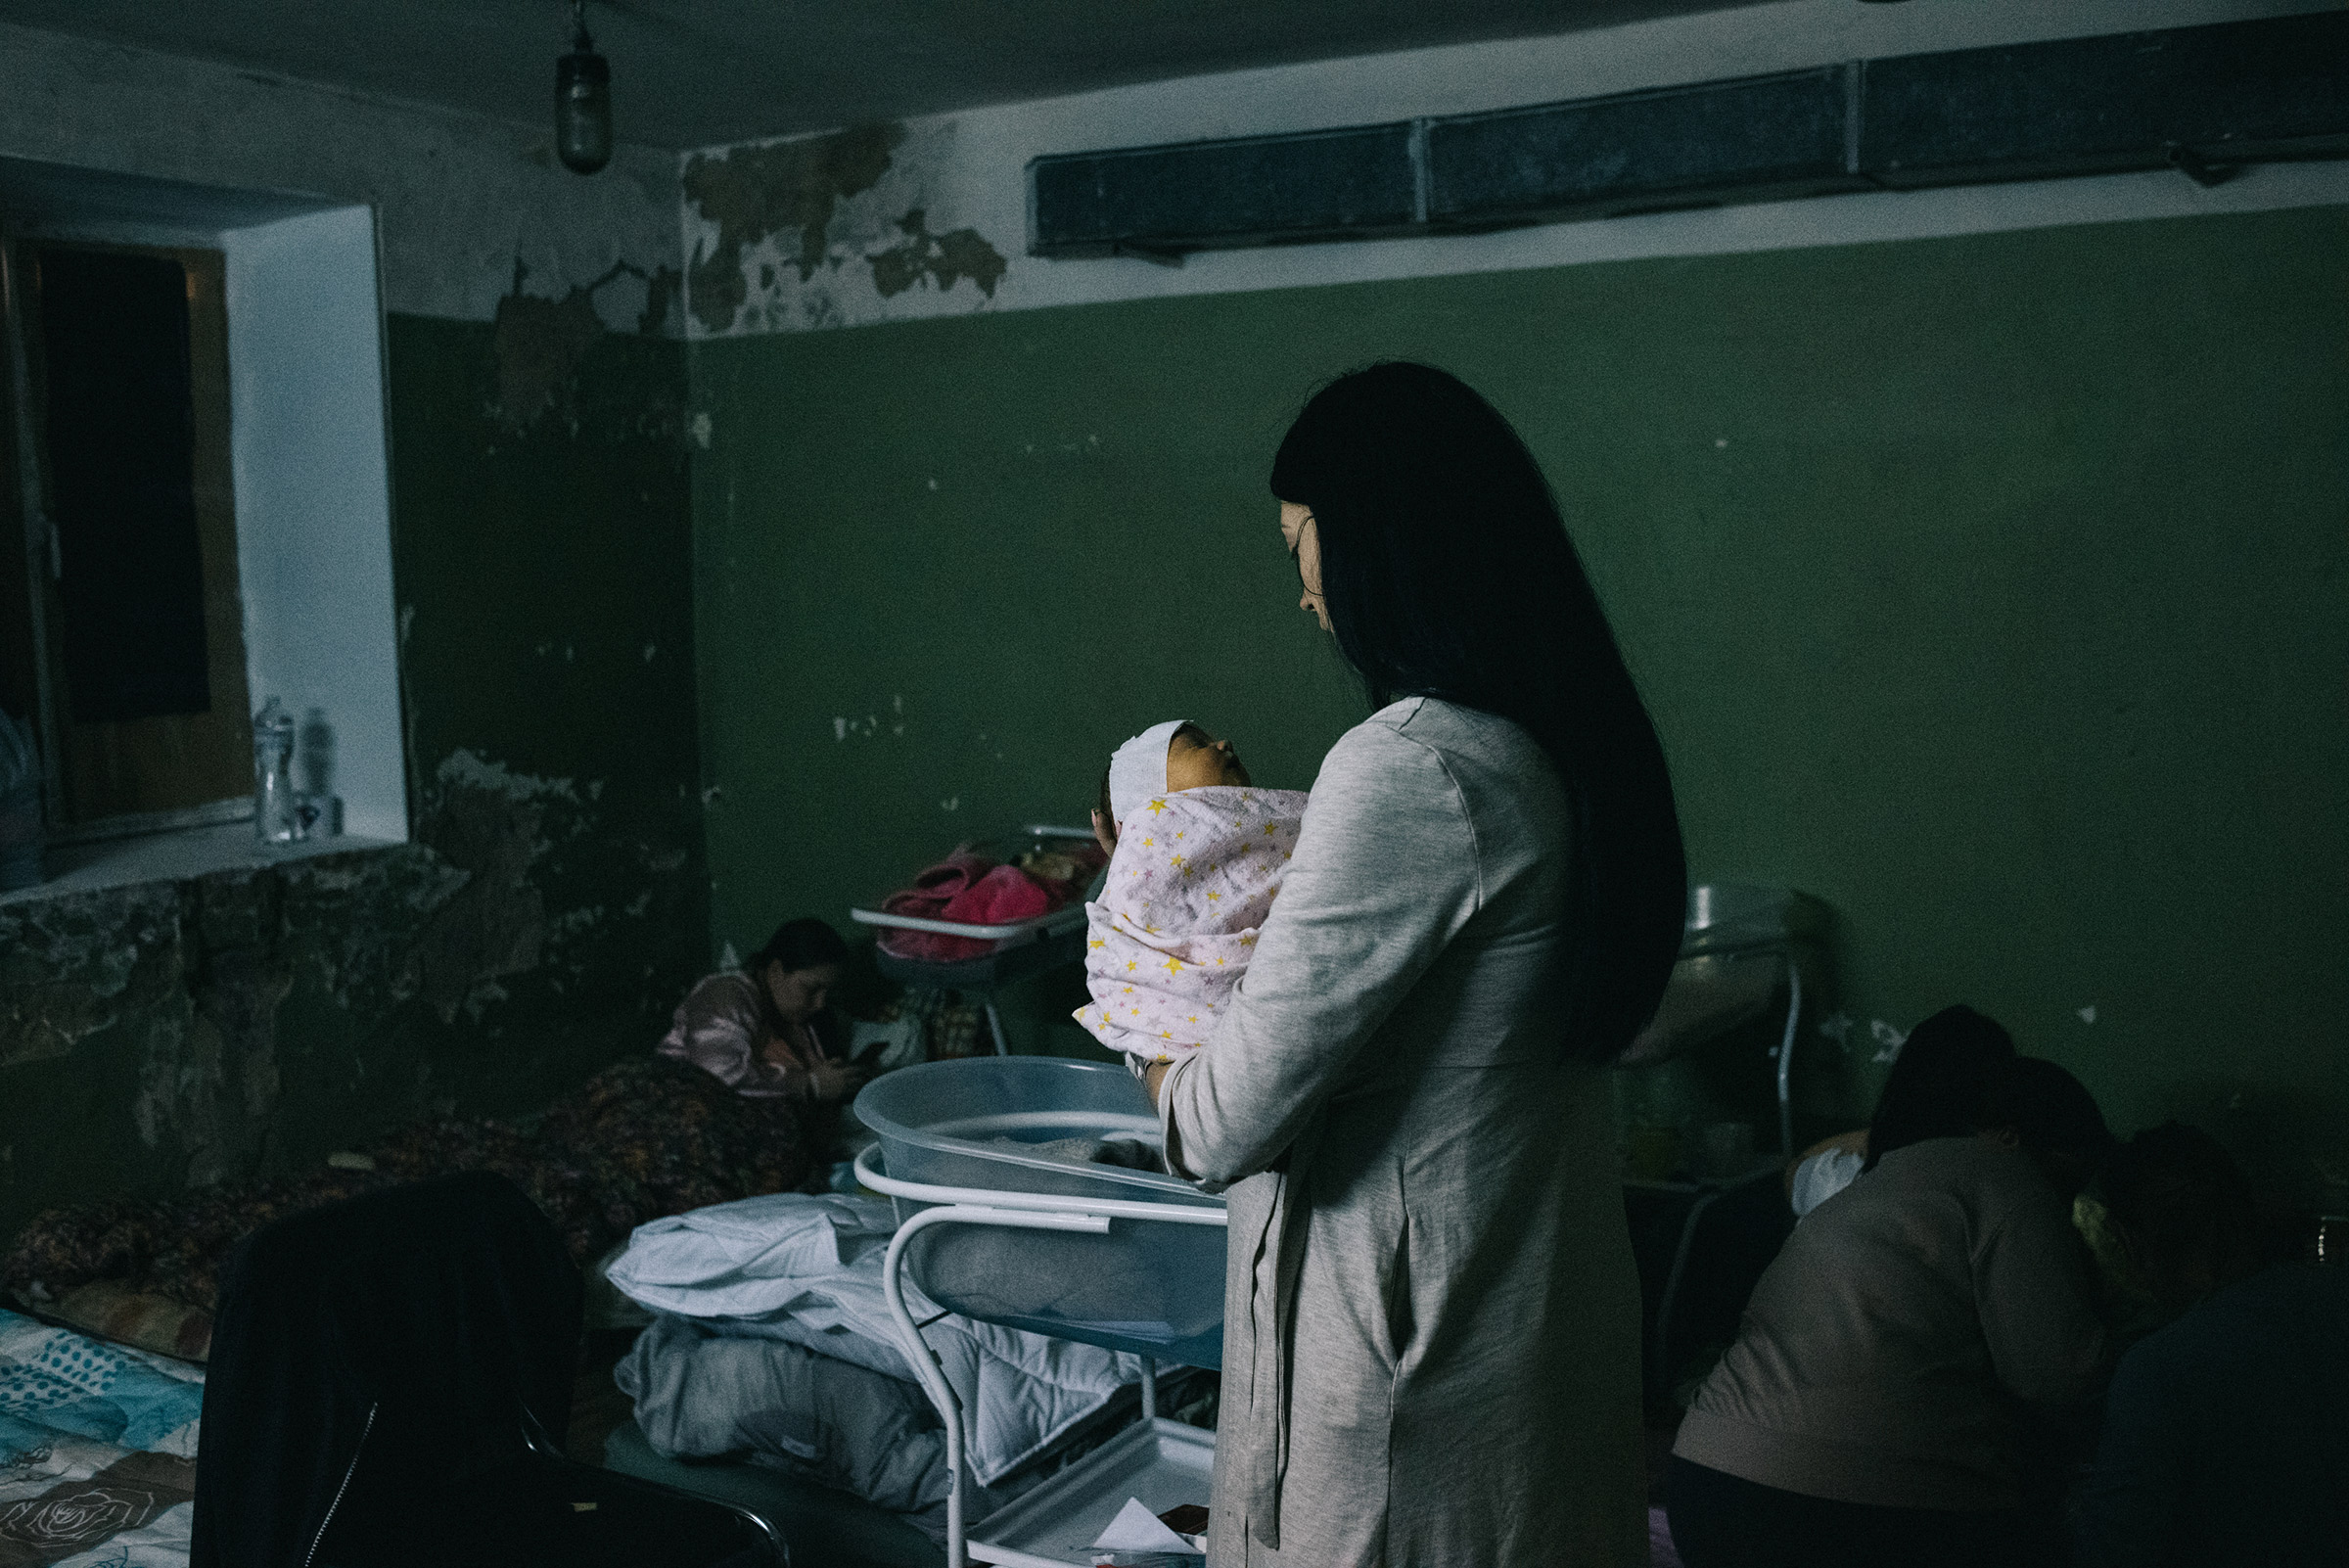 A maternity unit moved to the basement of their hospital in Kyiv on March 2 after a bombing nearby (Maxim Dondyuk)